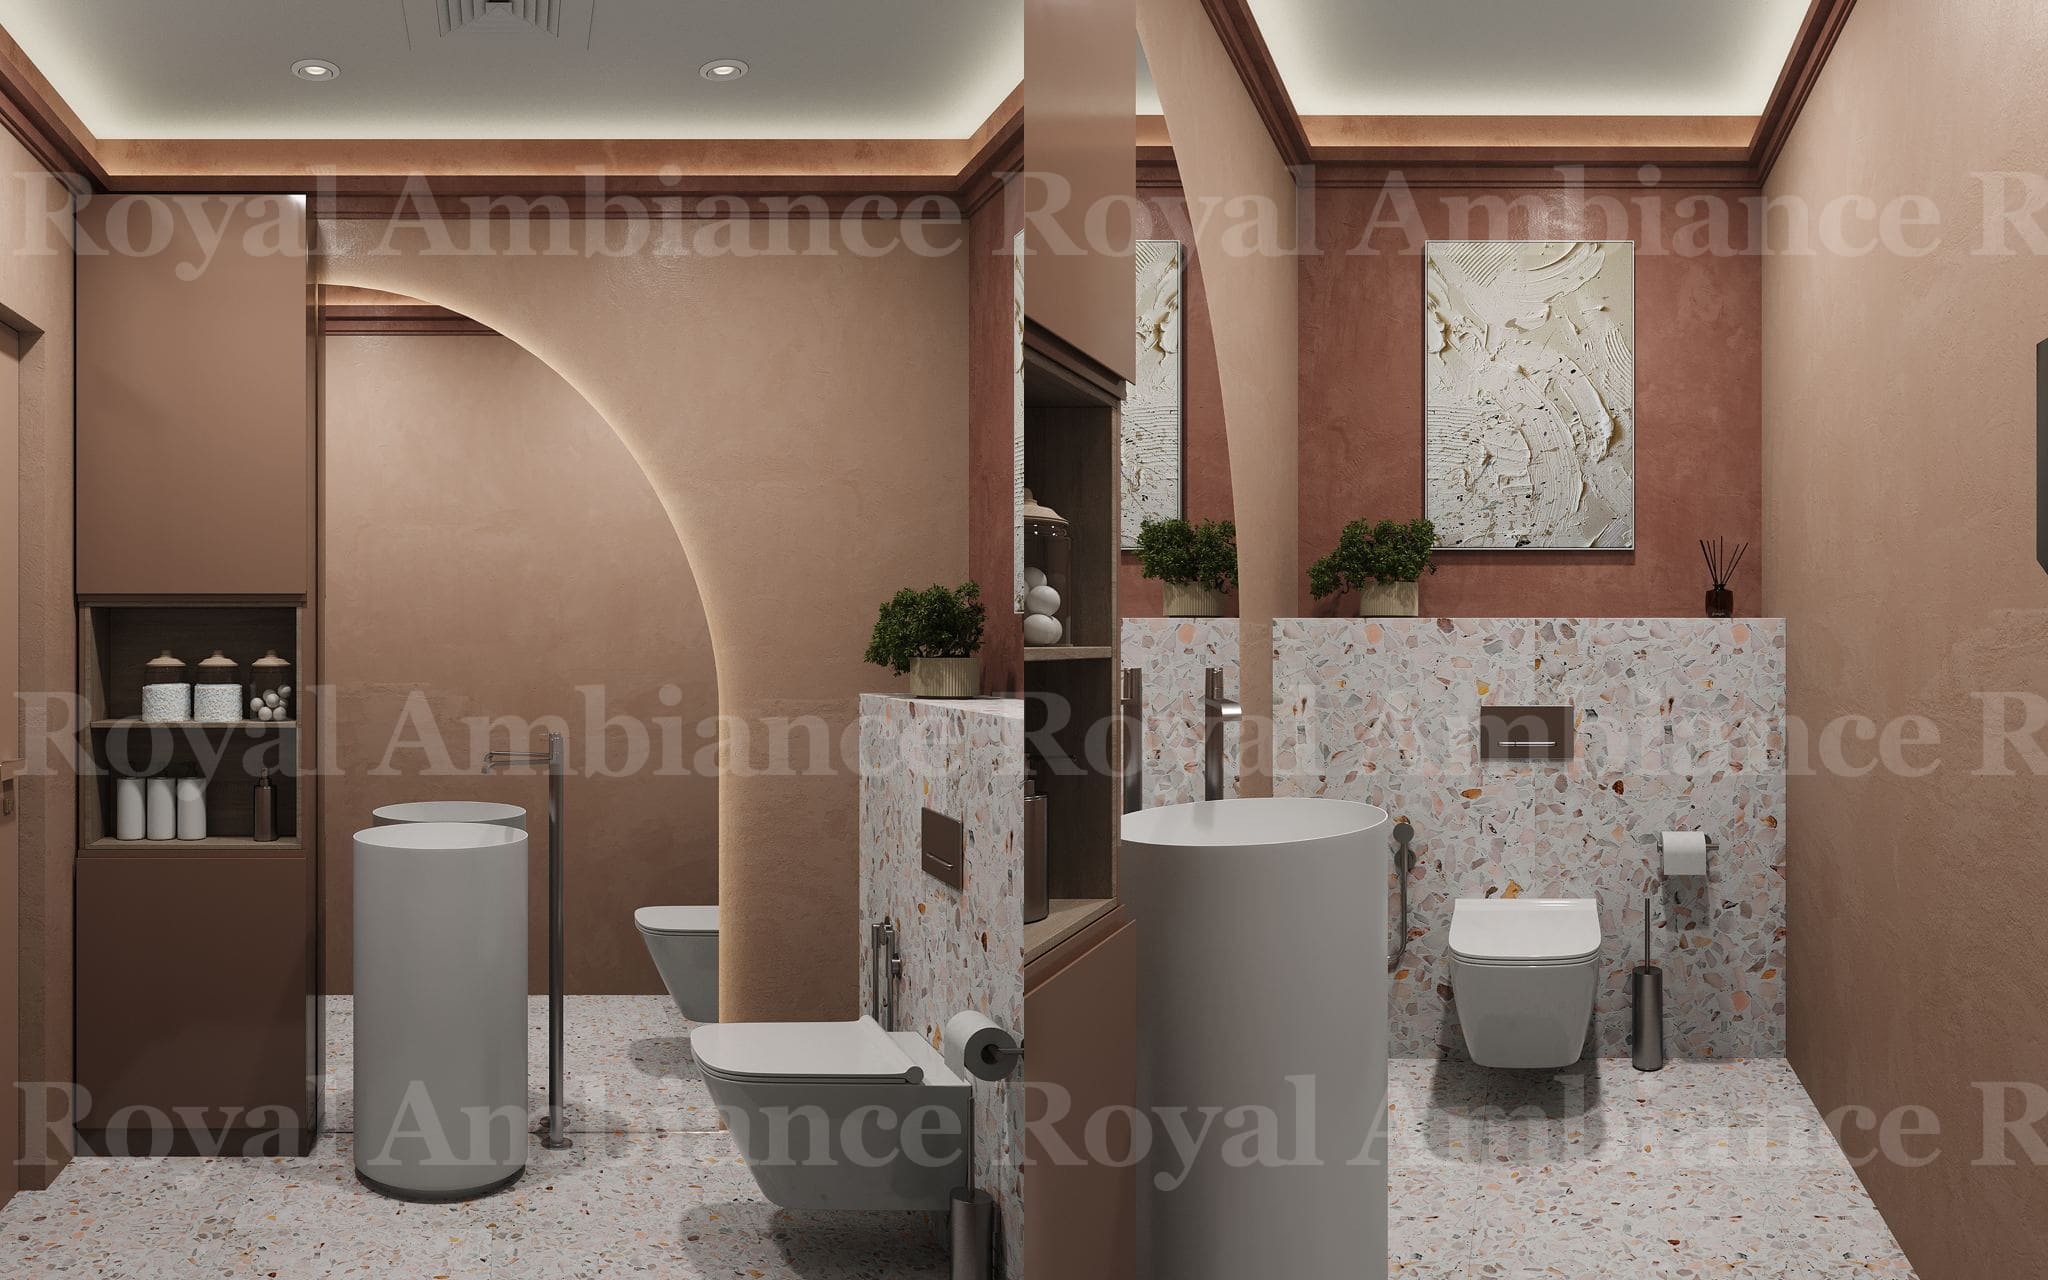 ITS BEAUTY ladies nails and haircutting salon design fit-out and joinery restroom washroom